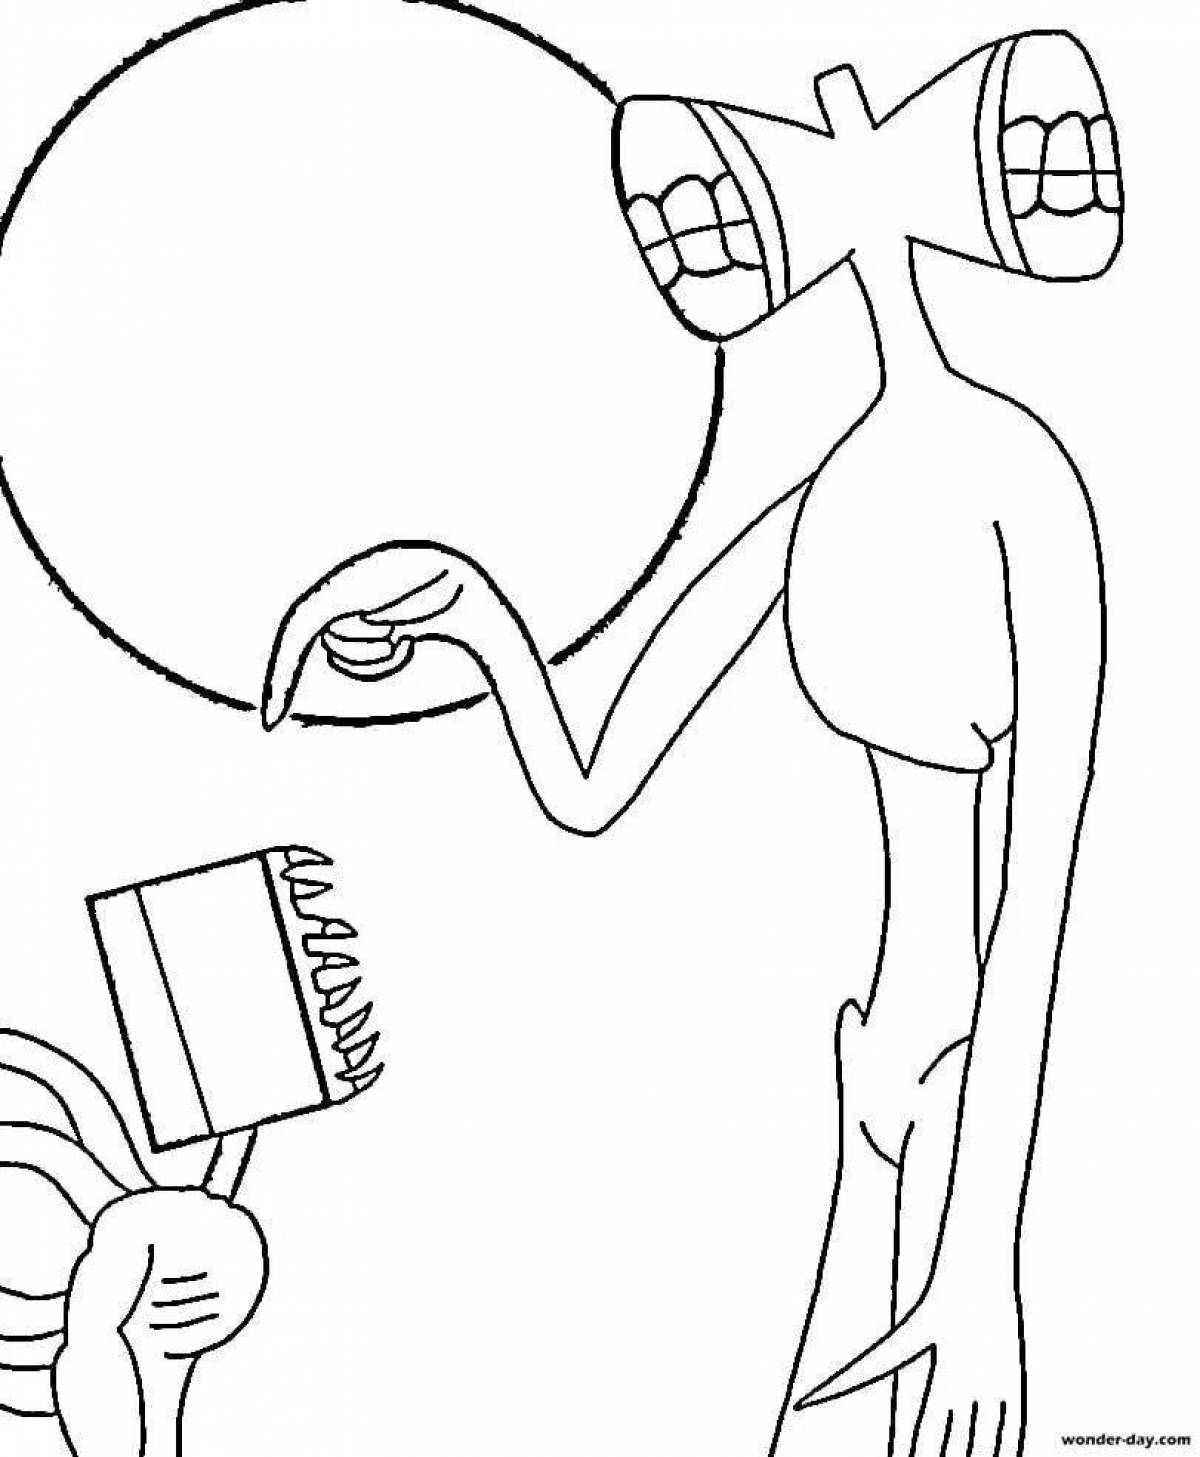 Amazing lamp coloring page